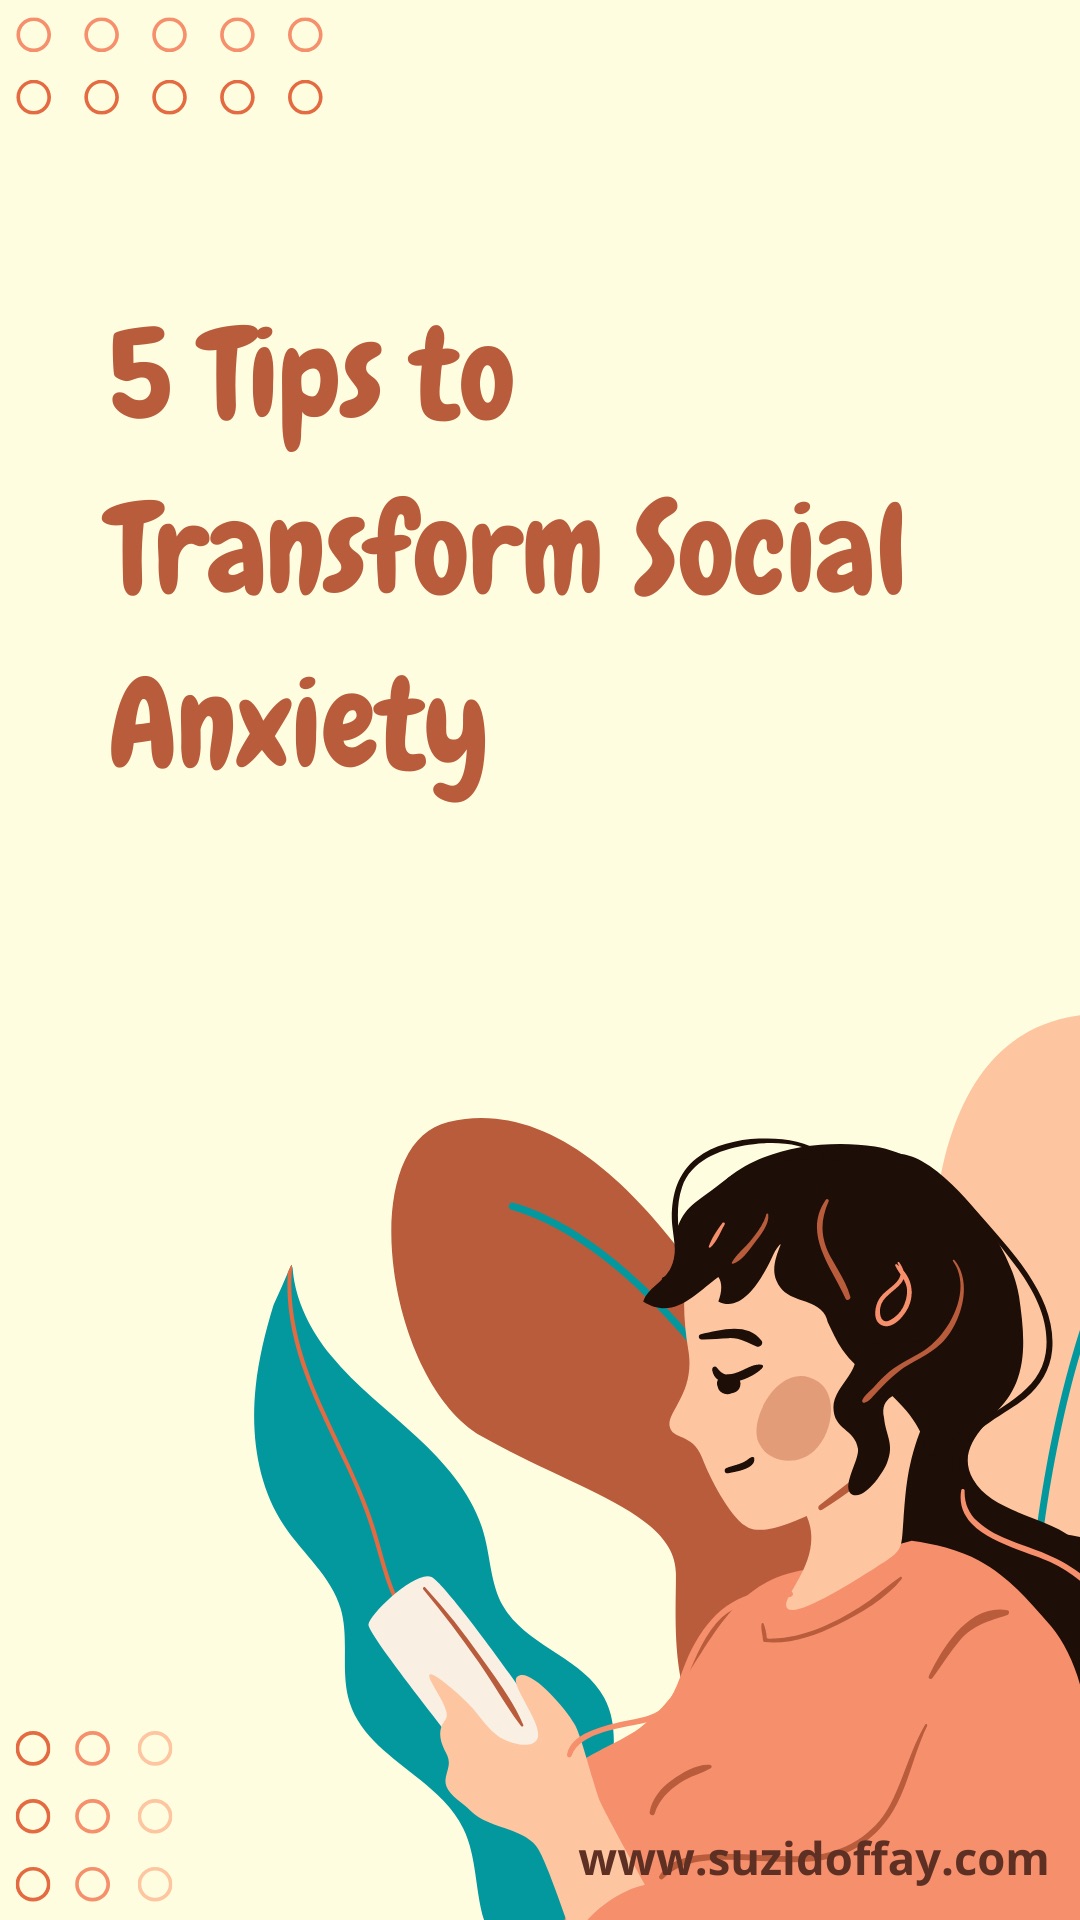 5 Tips to Transform Social Anxiety